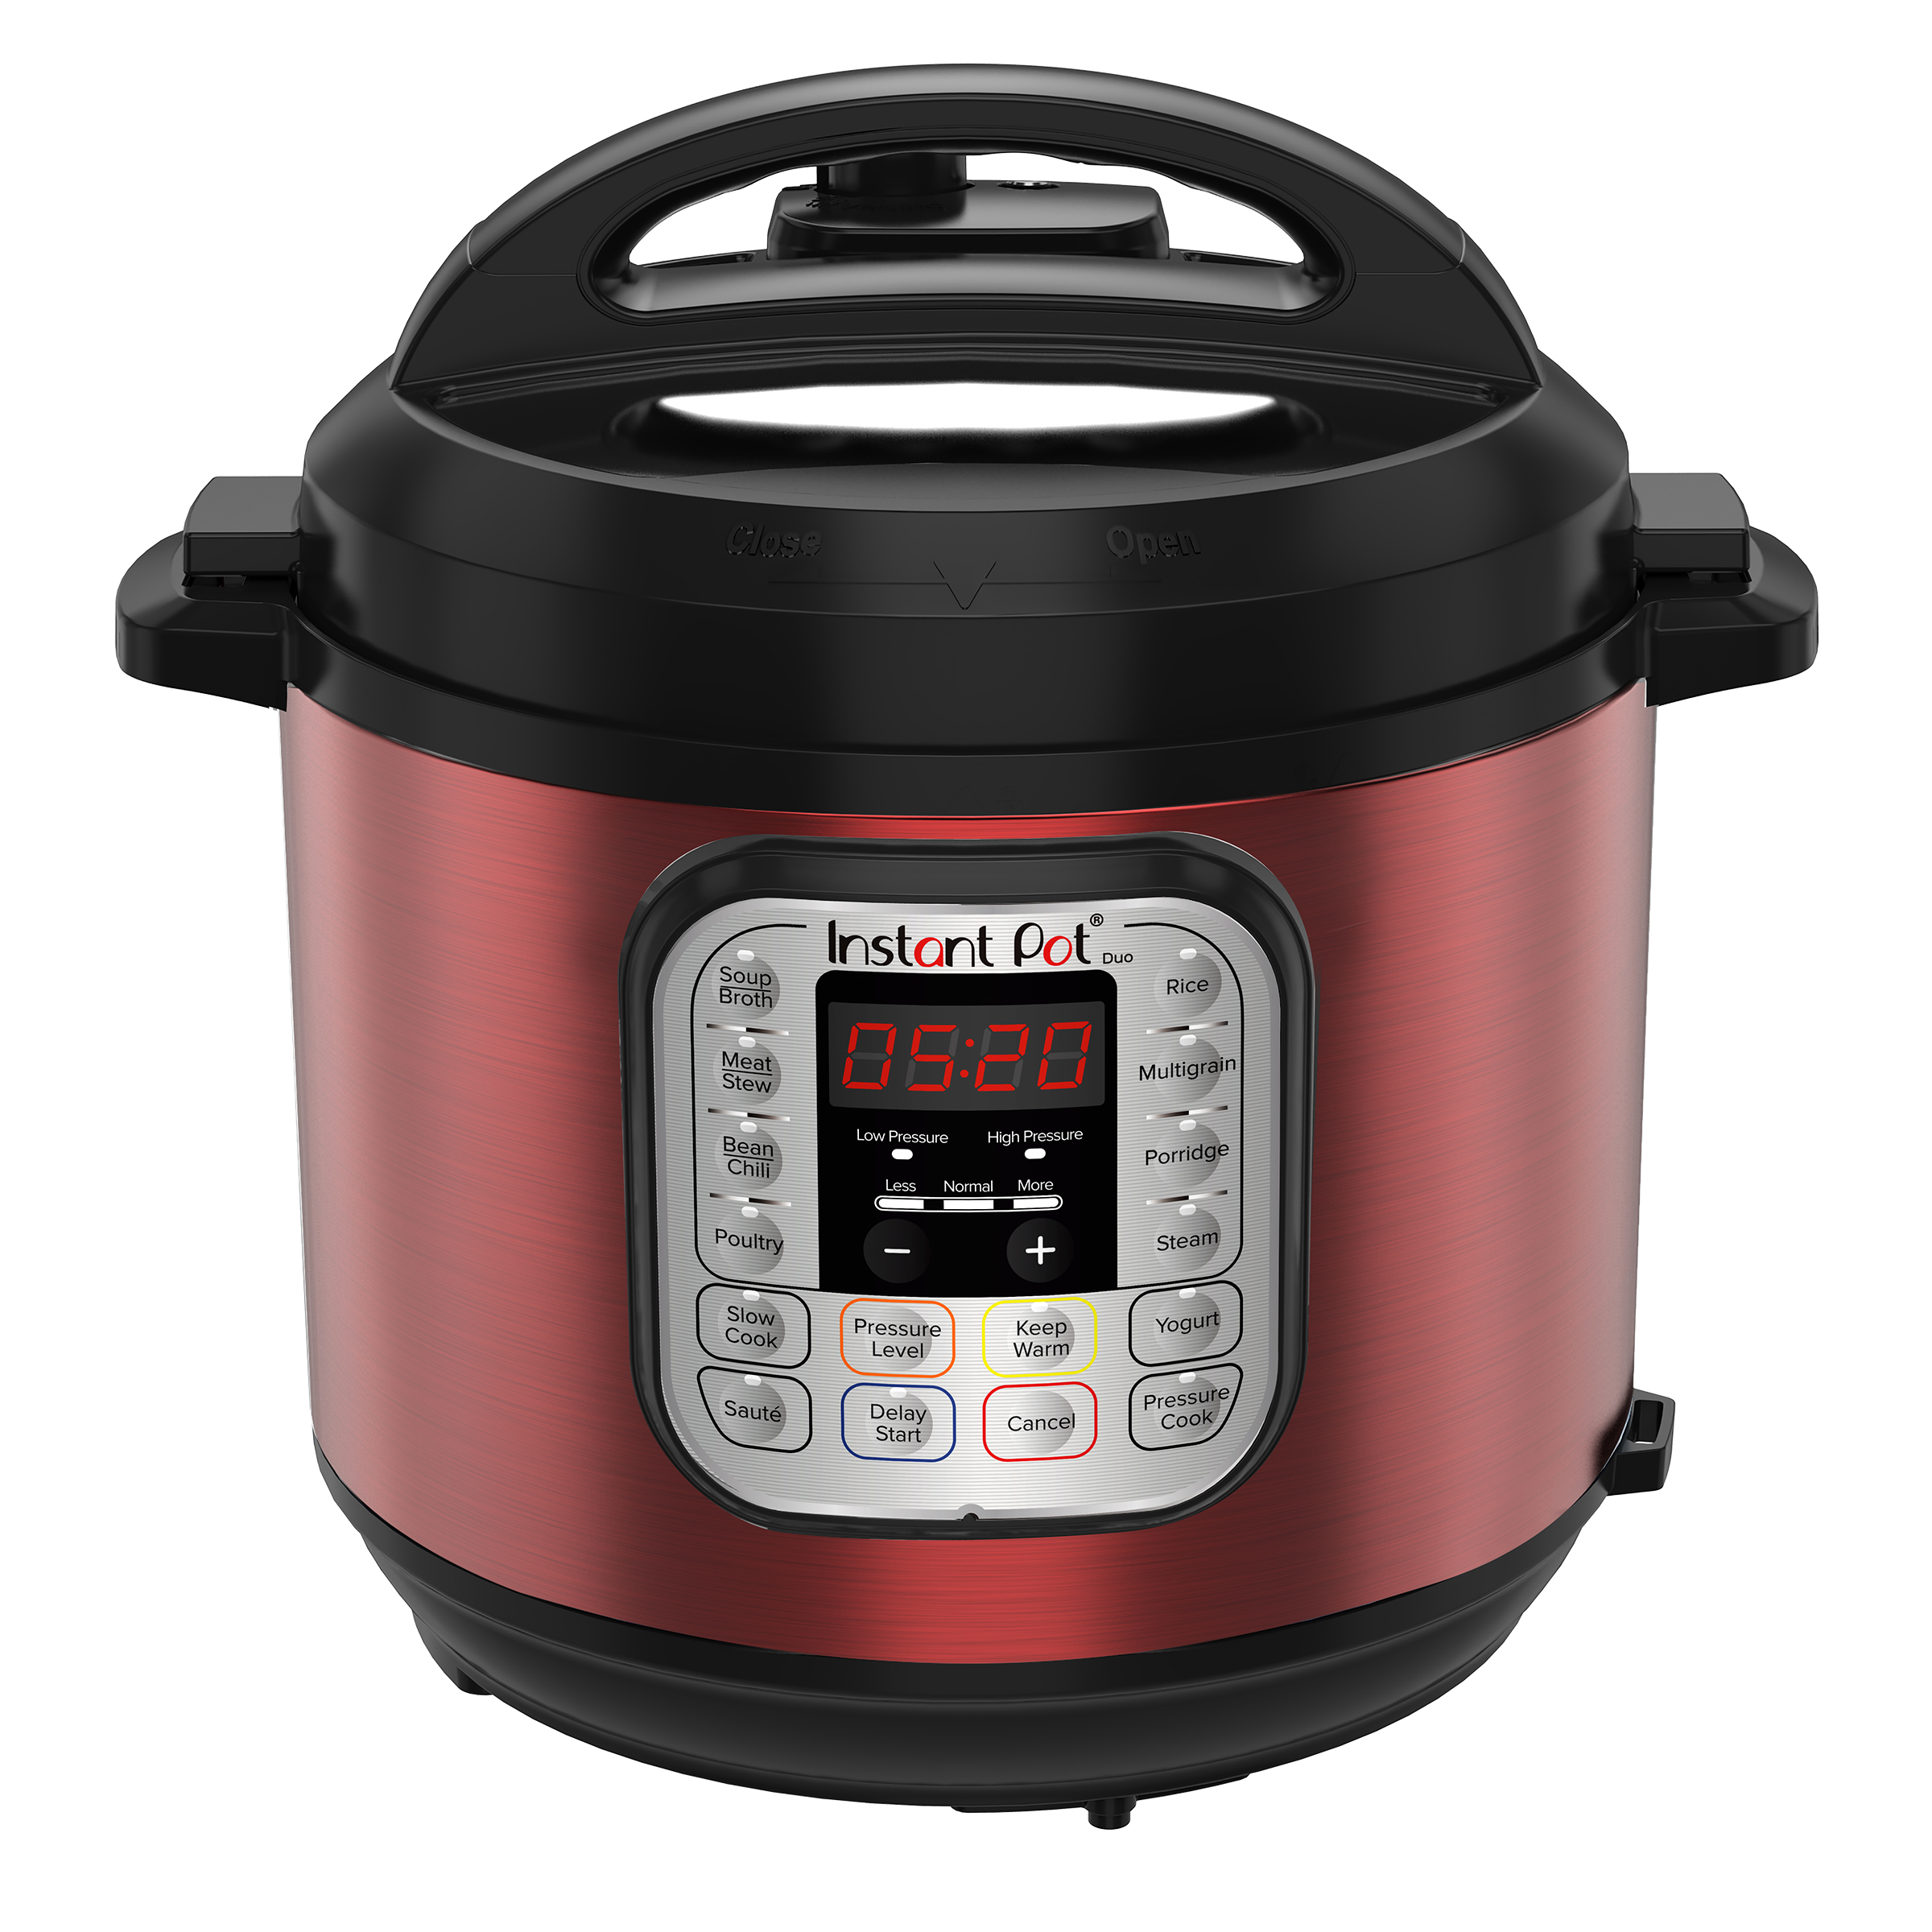 Review - UnBoxing  Instant Pot DUO60 6 Qt 7-in-1 Multi-Use Programmable Pressure  Cooker 